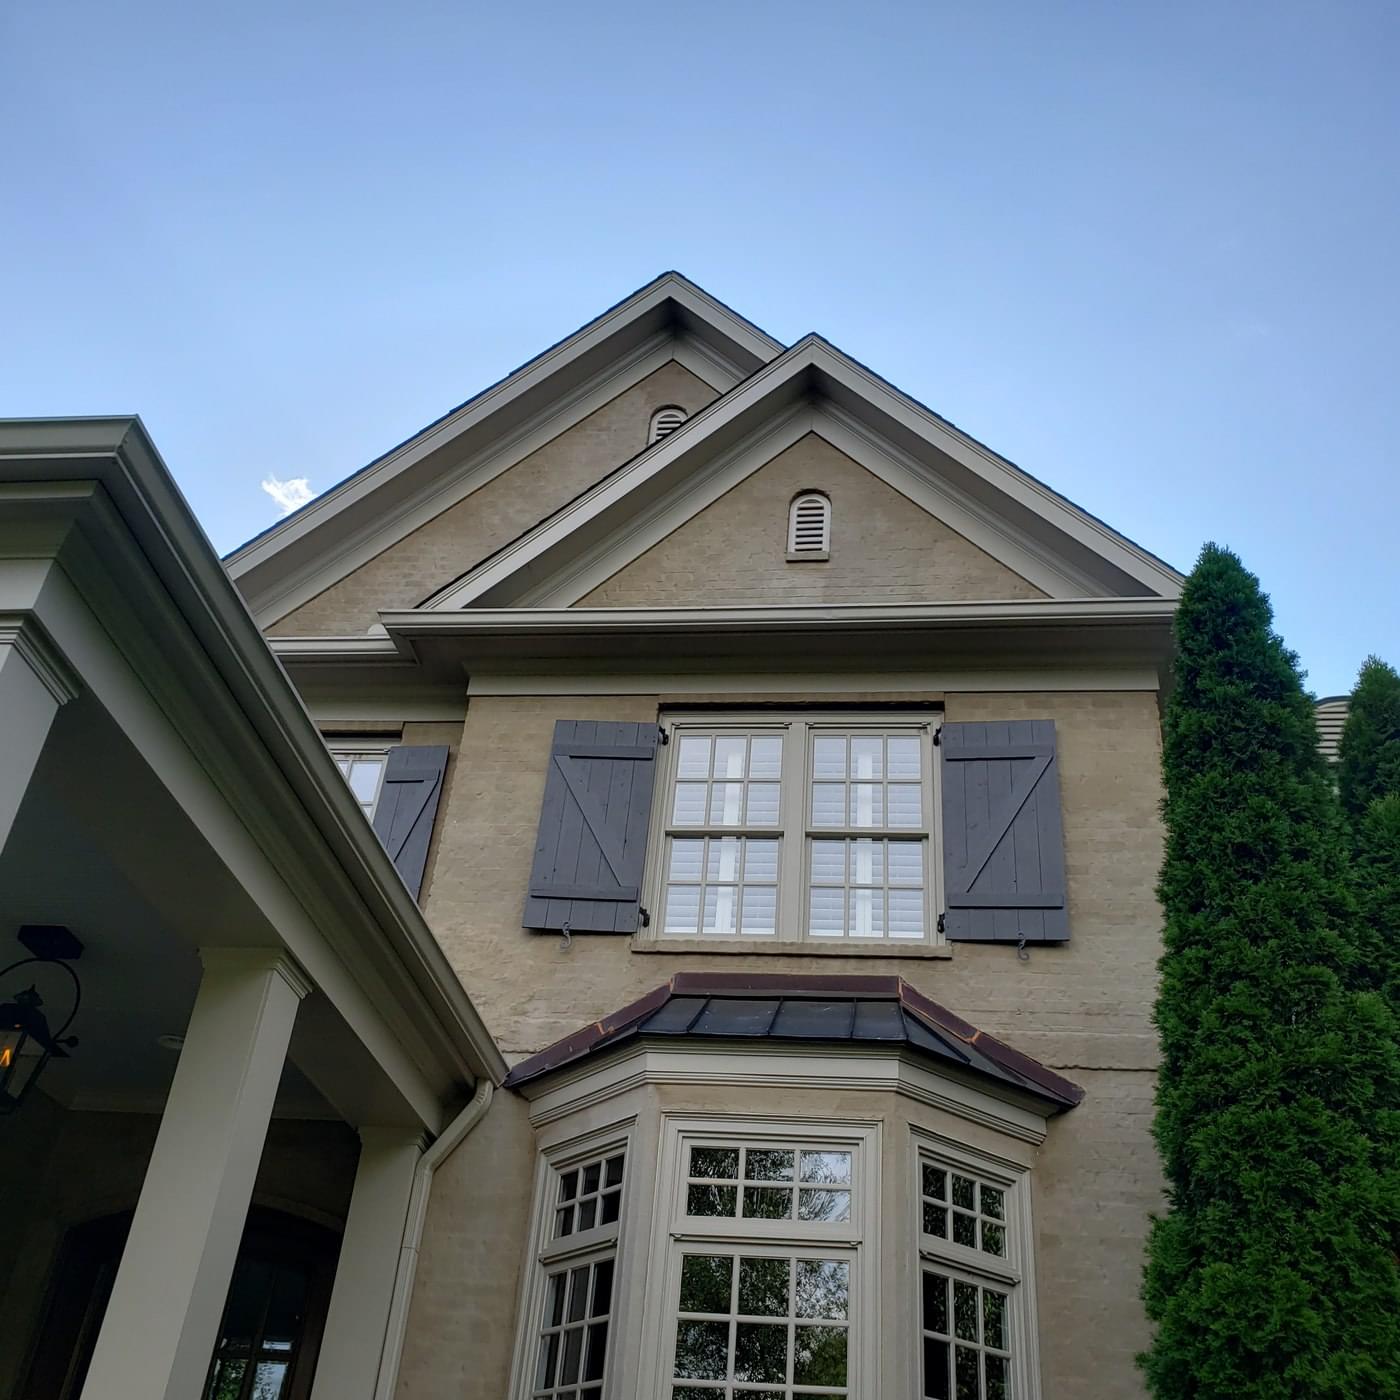 Brentwood Roofing And Home Improvement Reviews  : Unbiased Customer Feedback